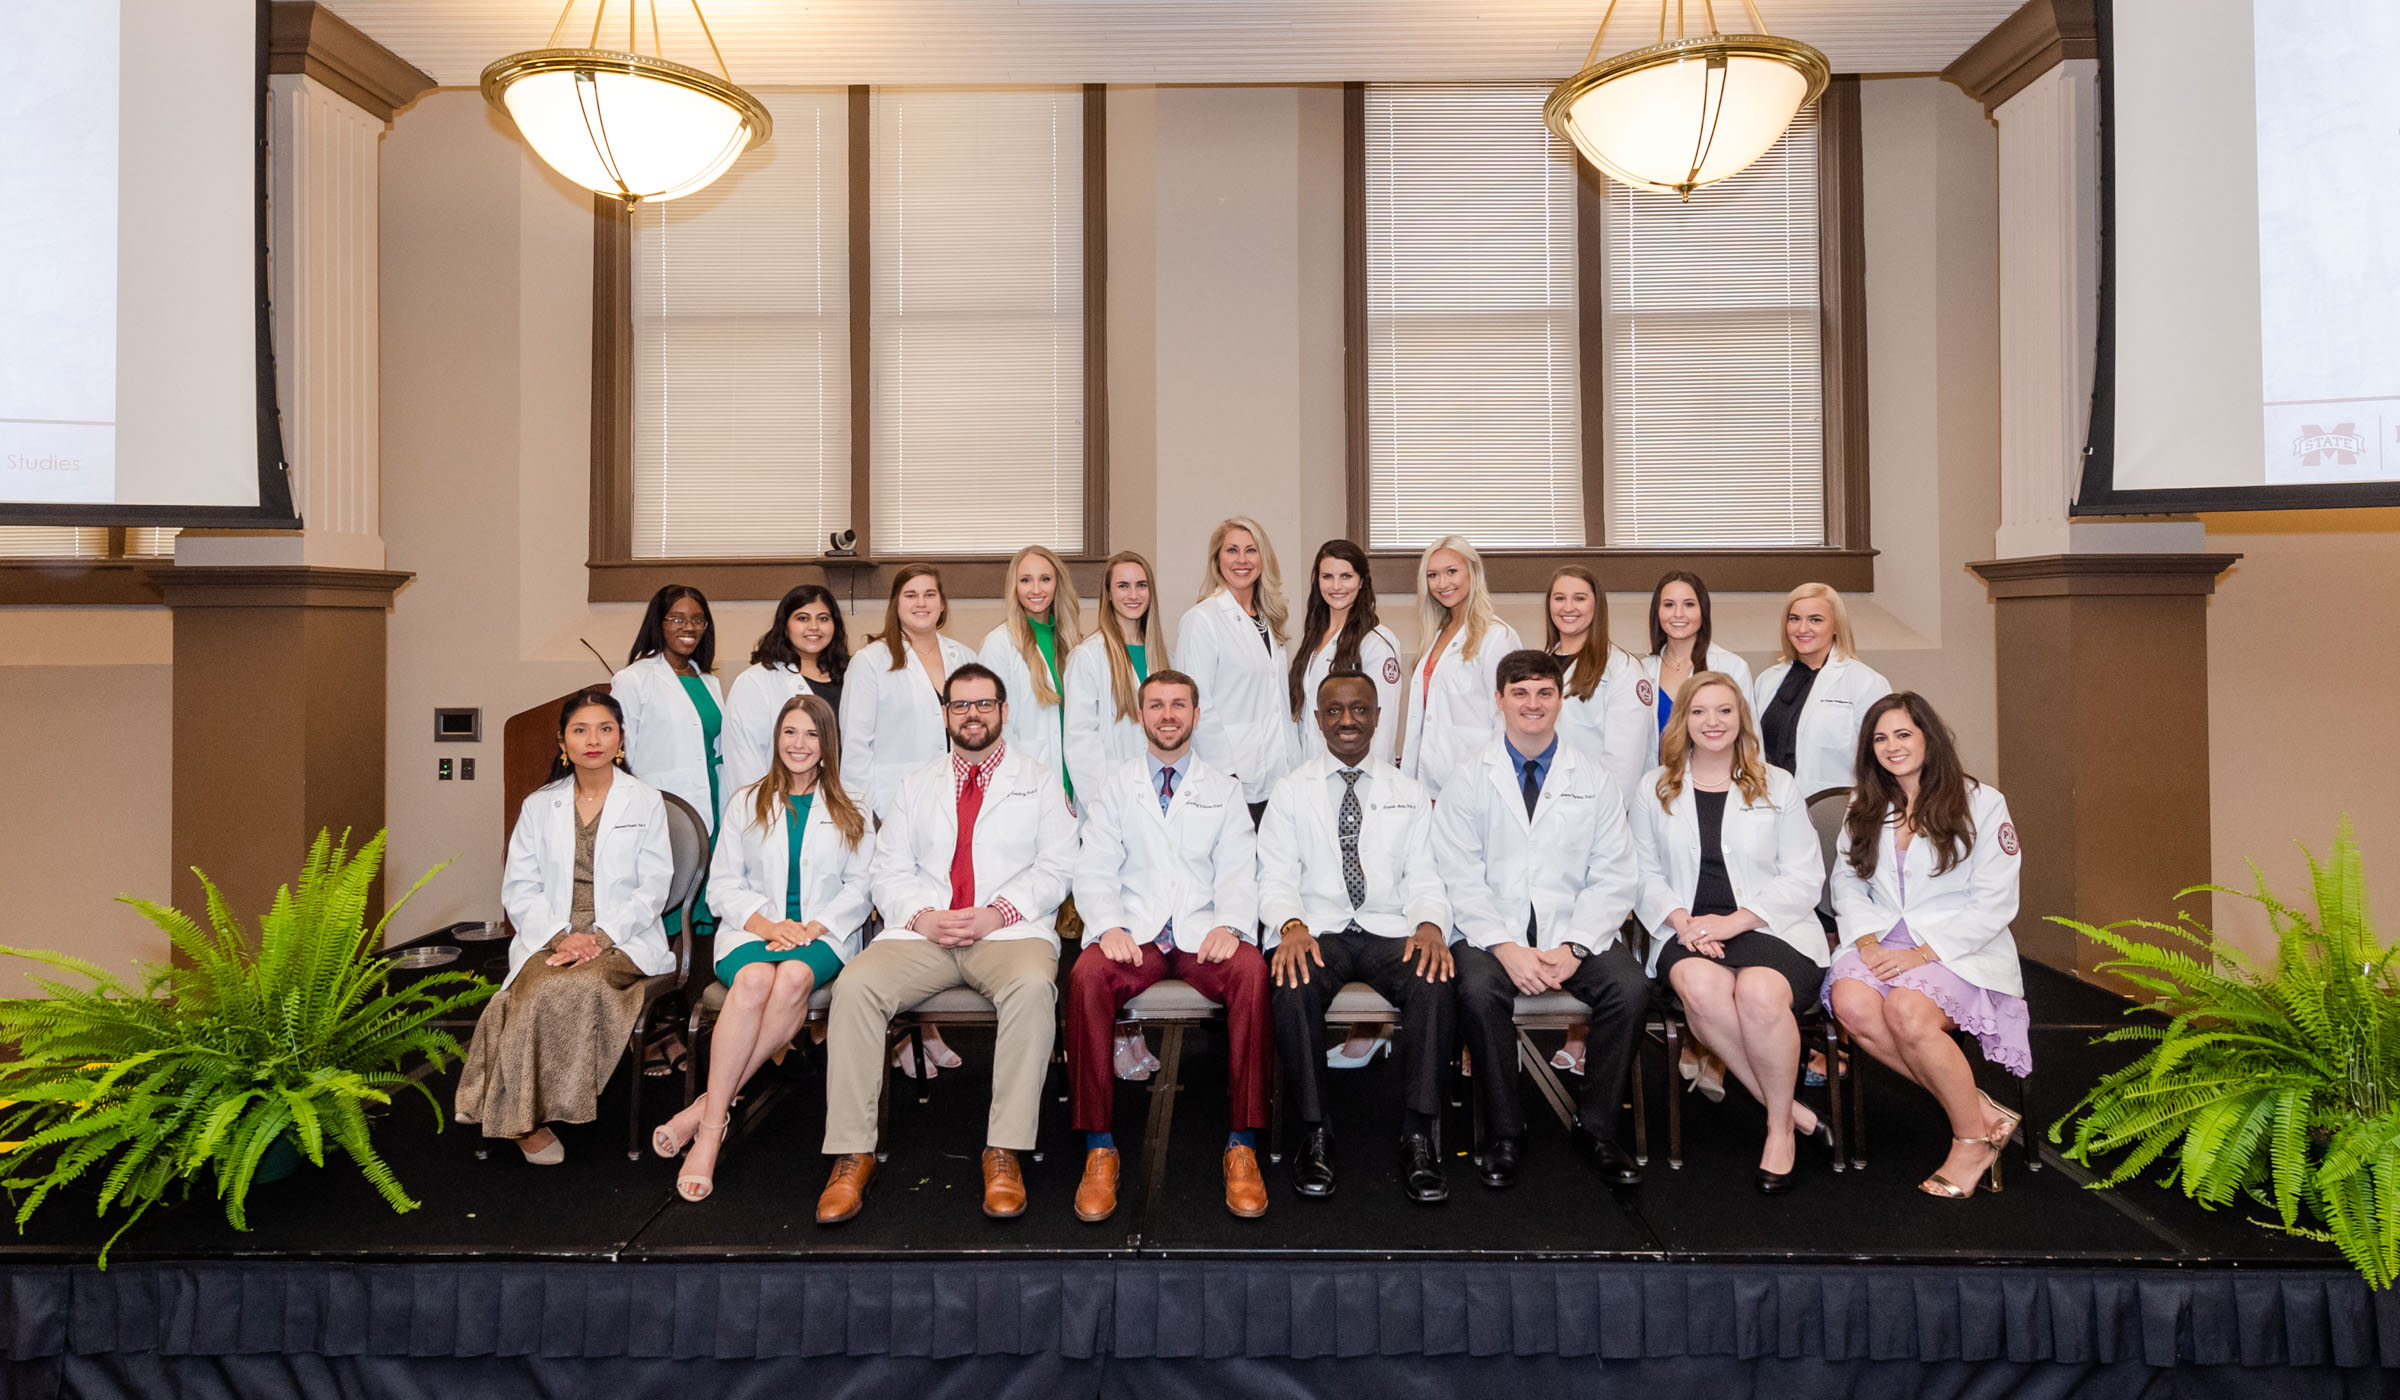 Physician Assistant Studies students receiving their white coats